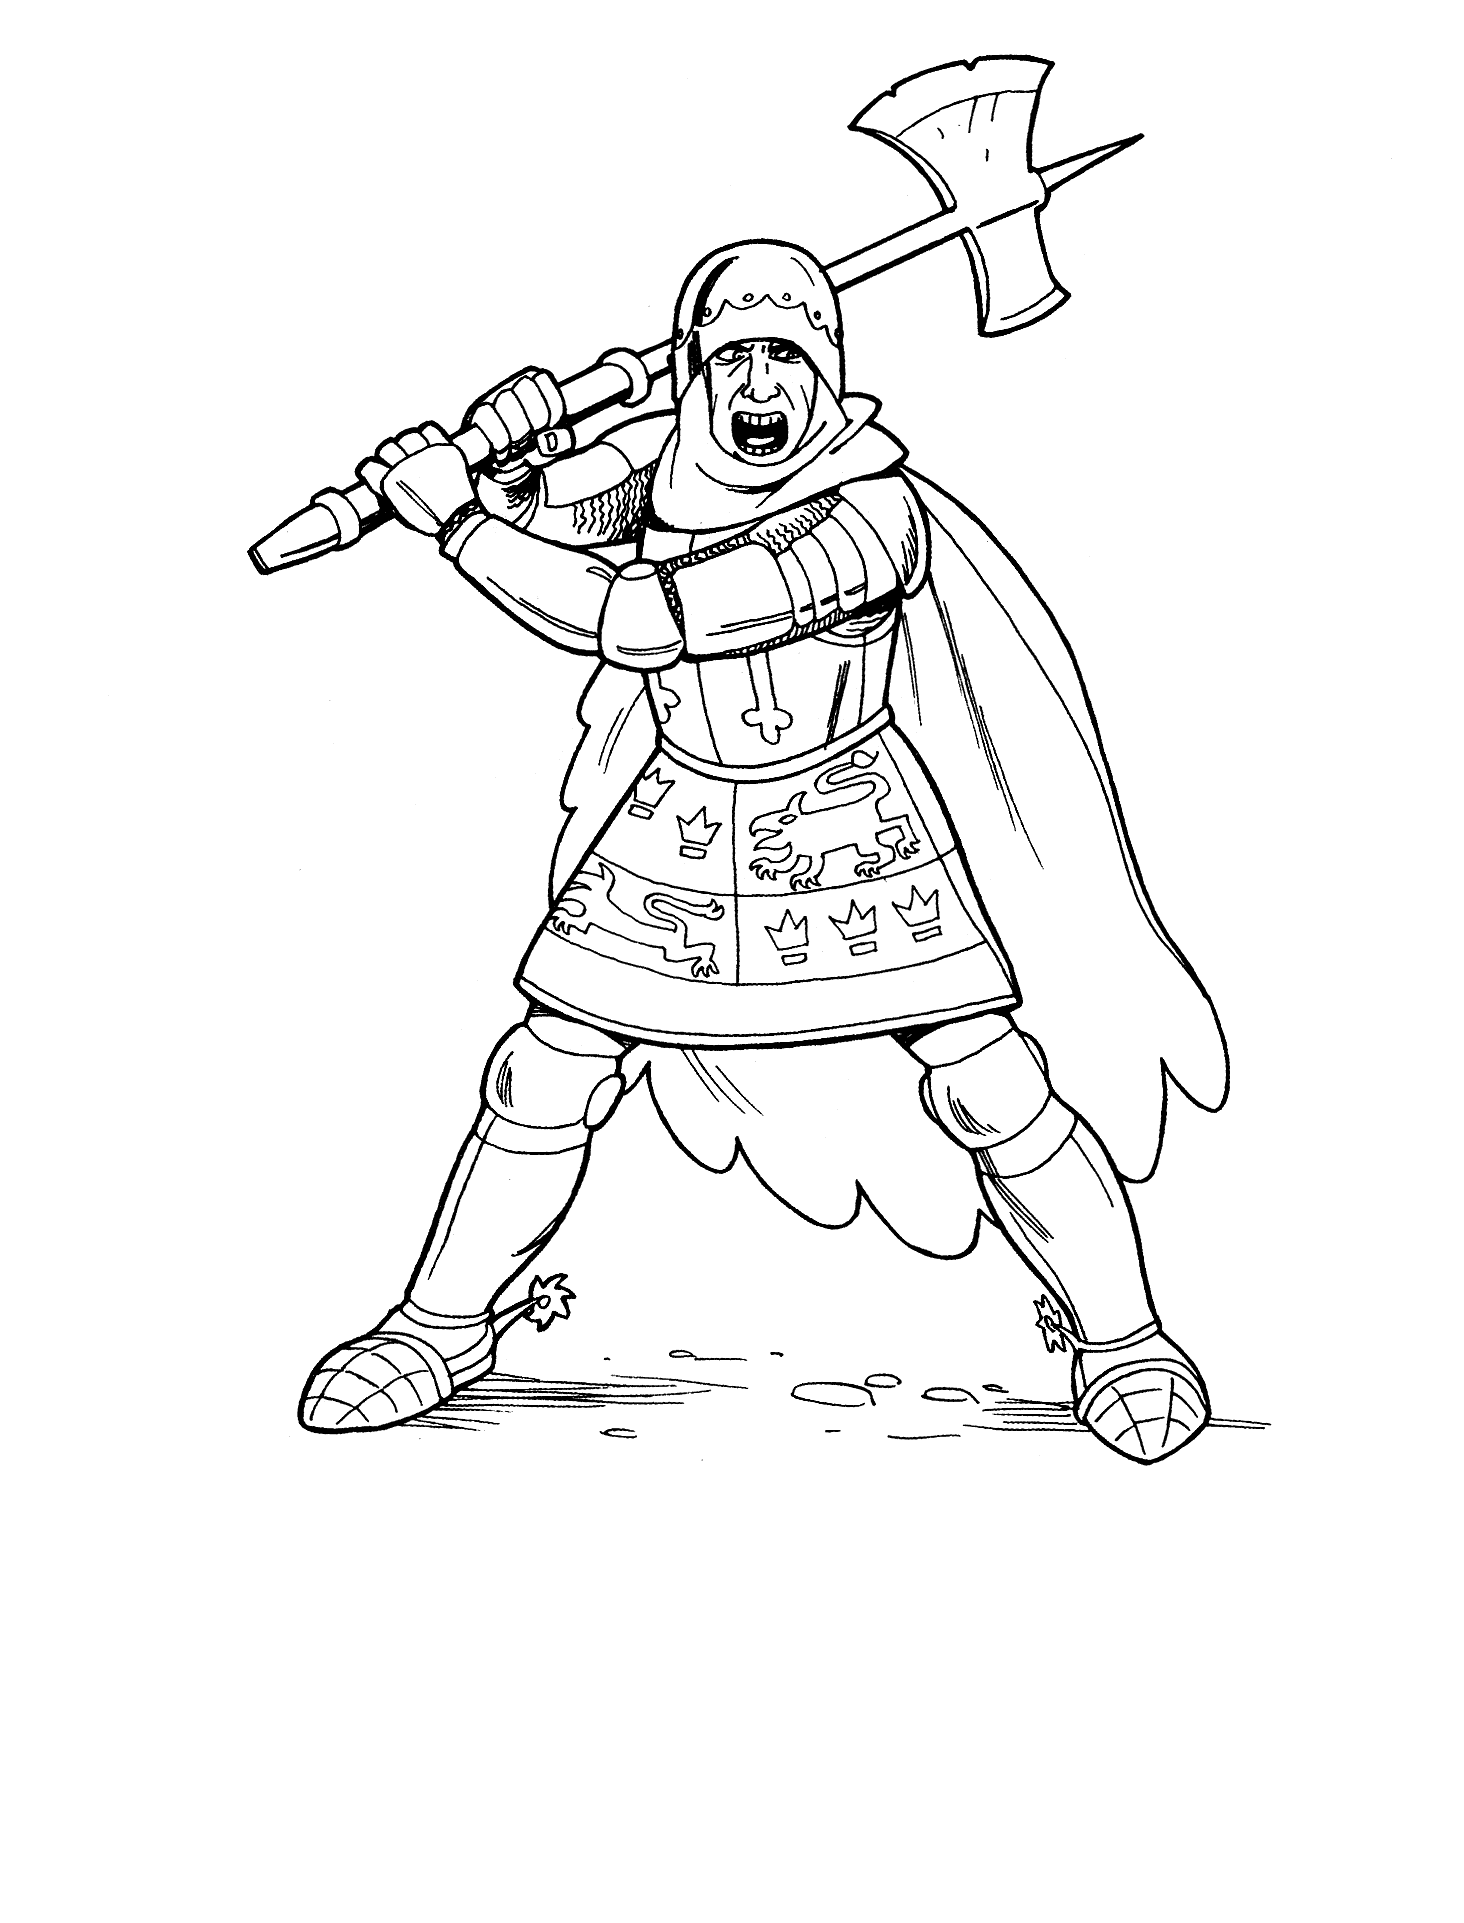 Coloring Pages Knights Dragons Home Soldiers 11 Free